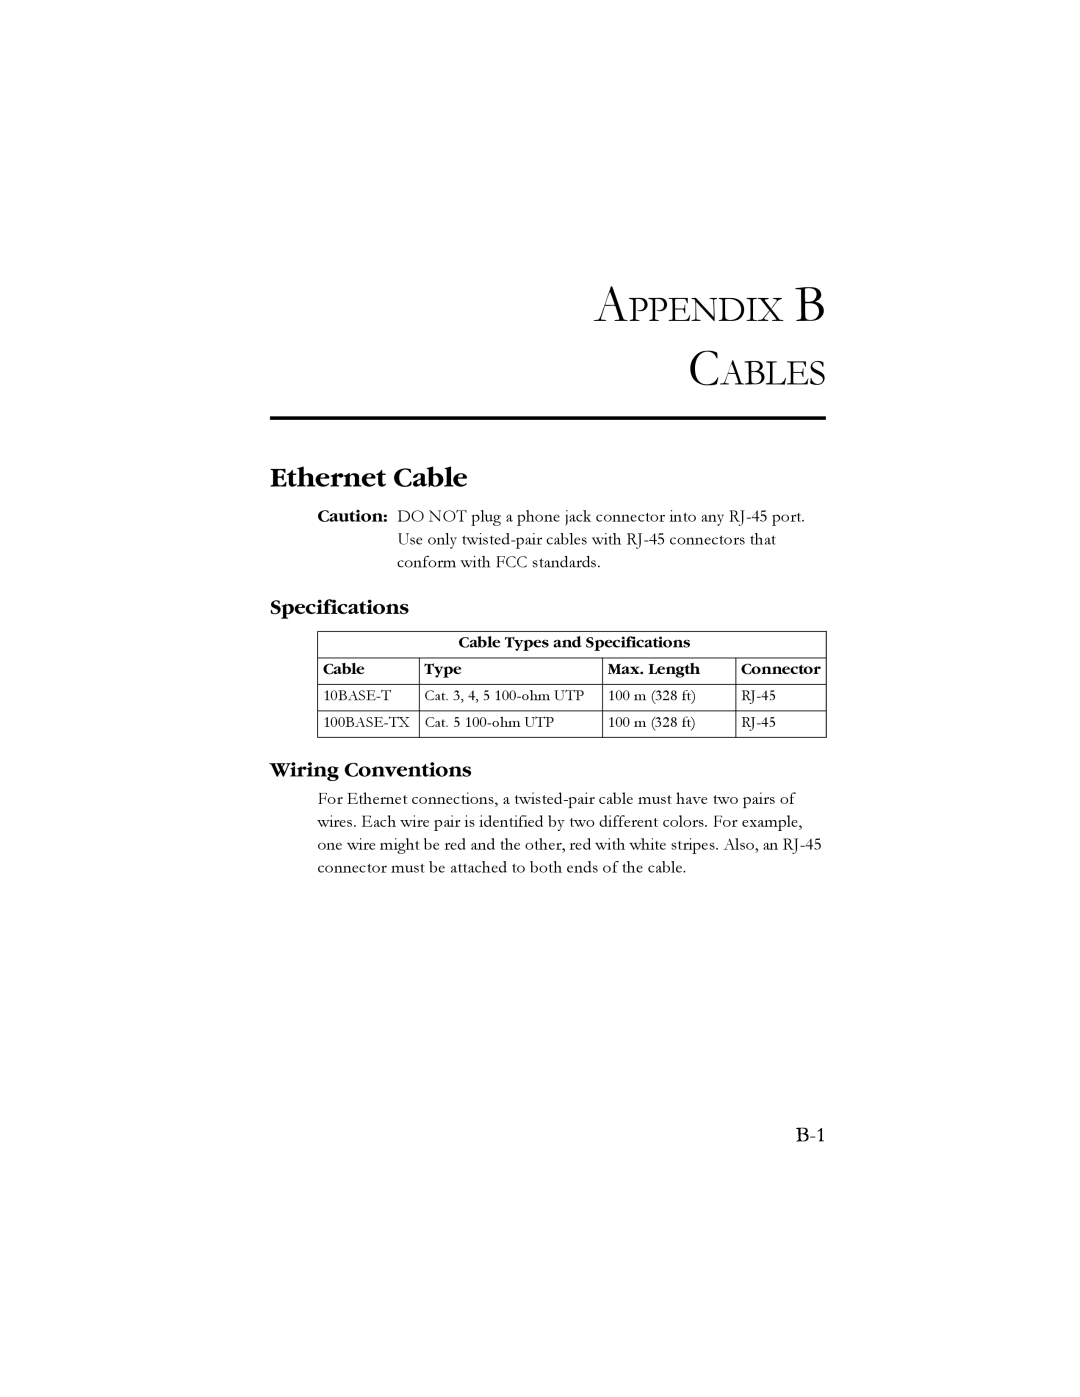 SMC Networks SMC7908VoWBRA manual Appendix B Cables, Ethernet Cable, Specifications, Wiring Conventions 